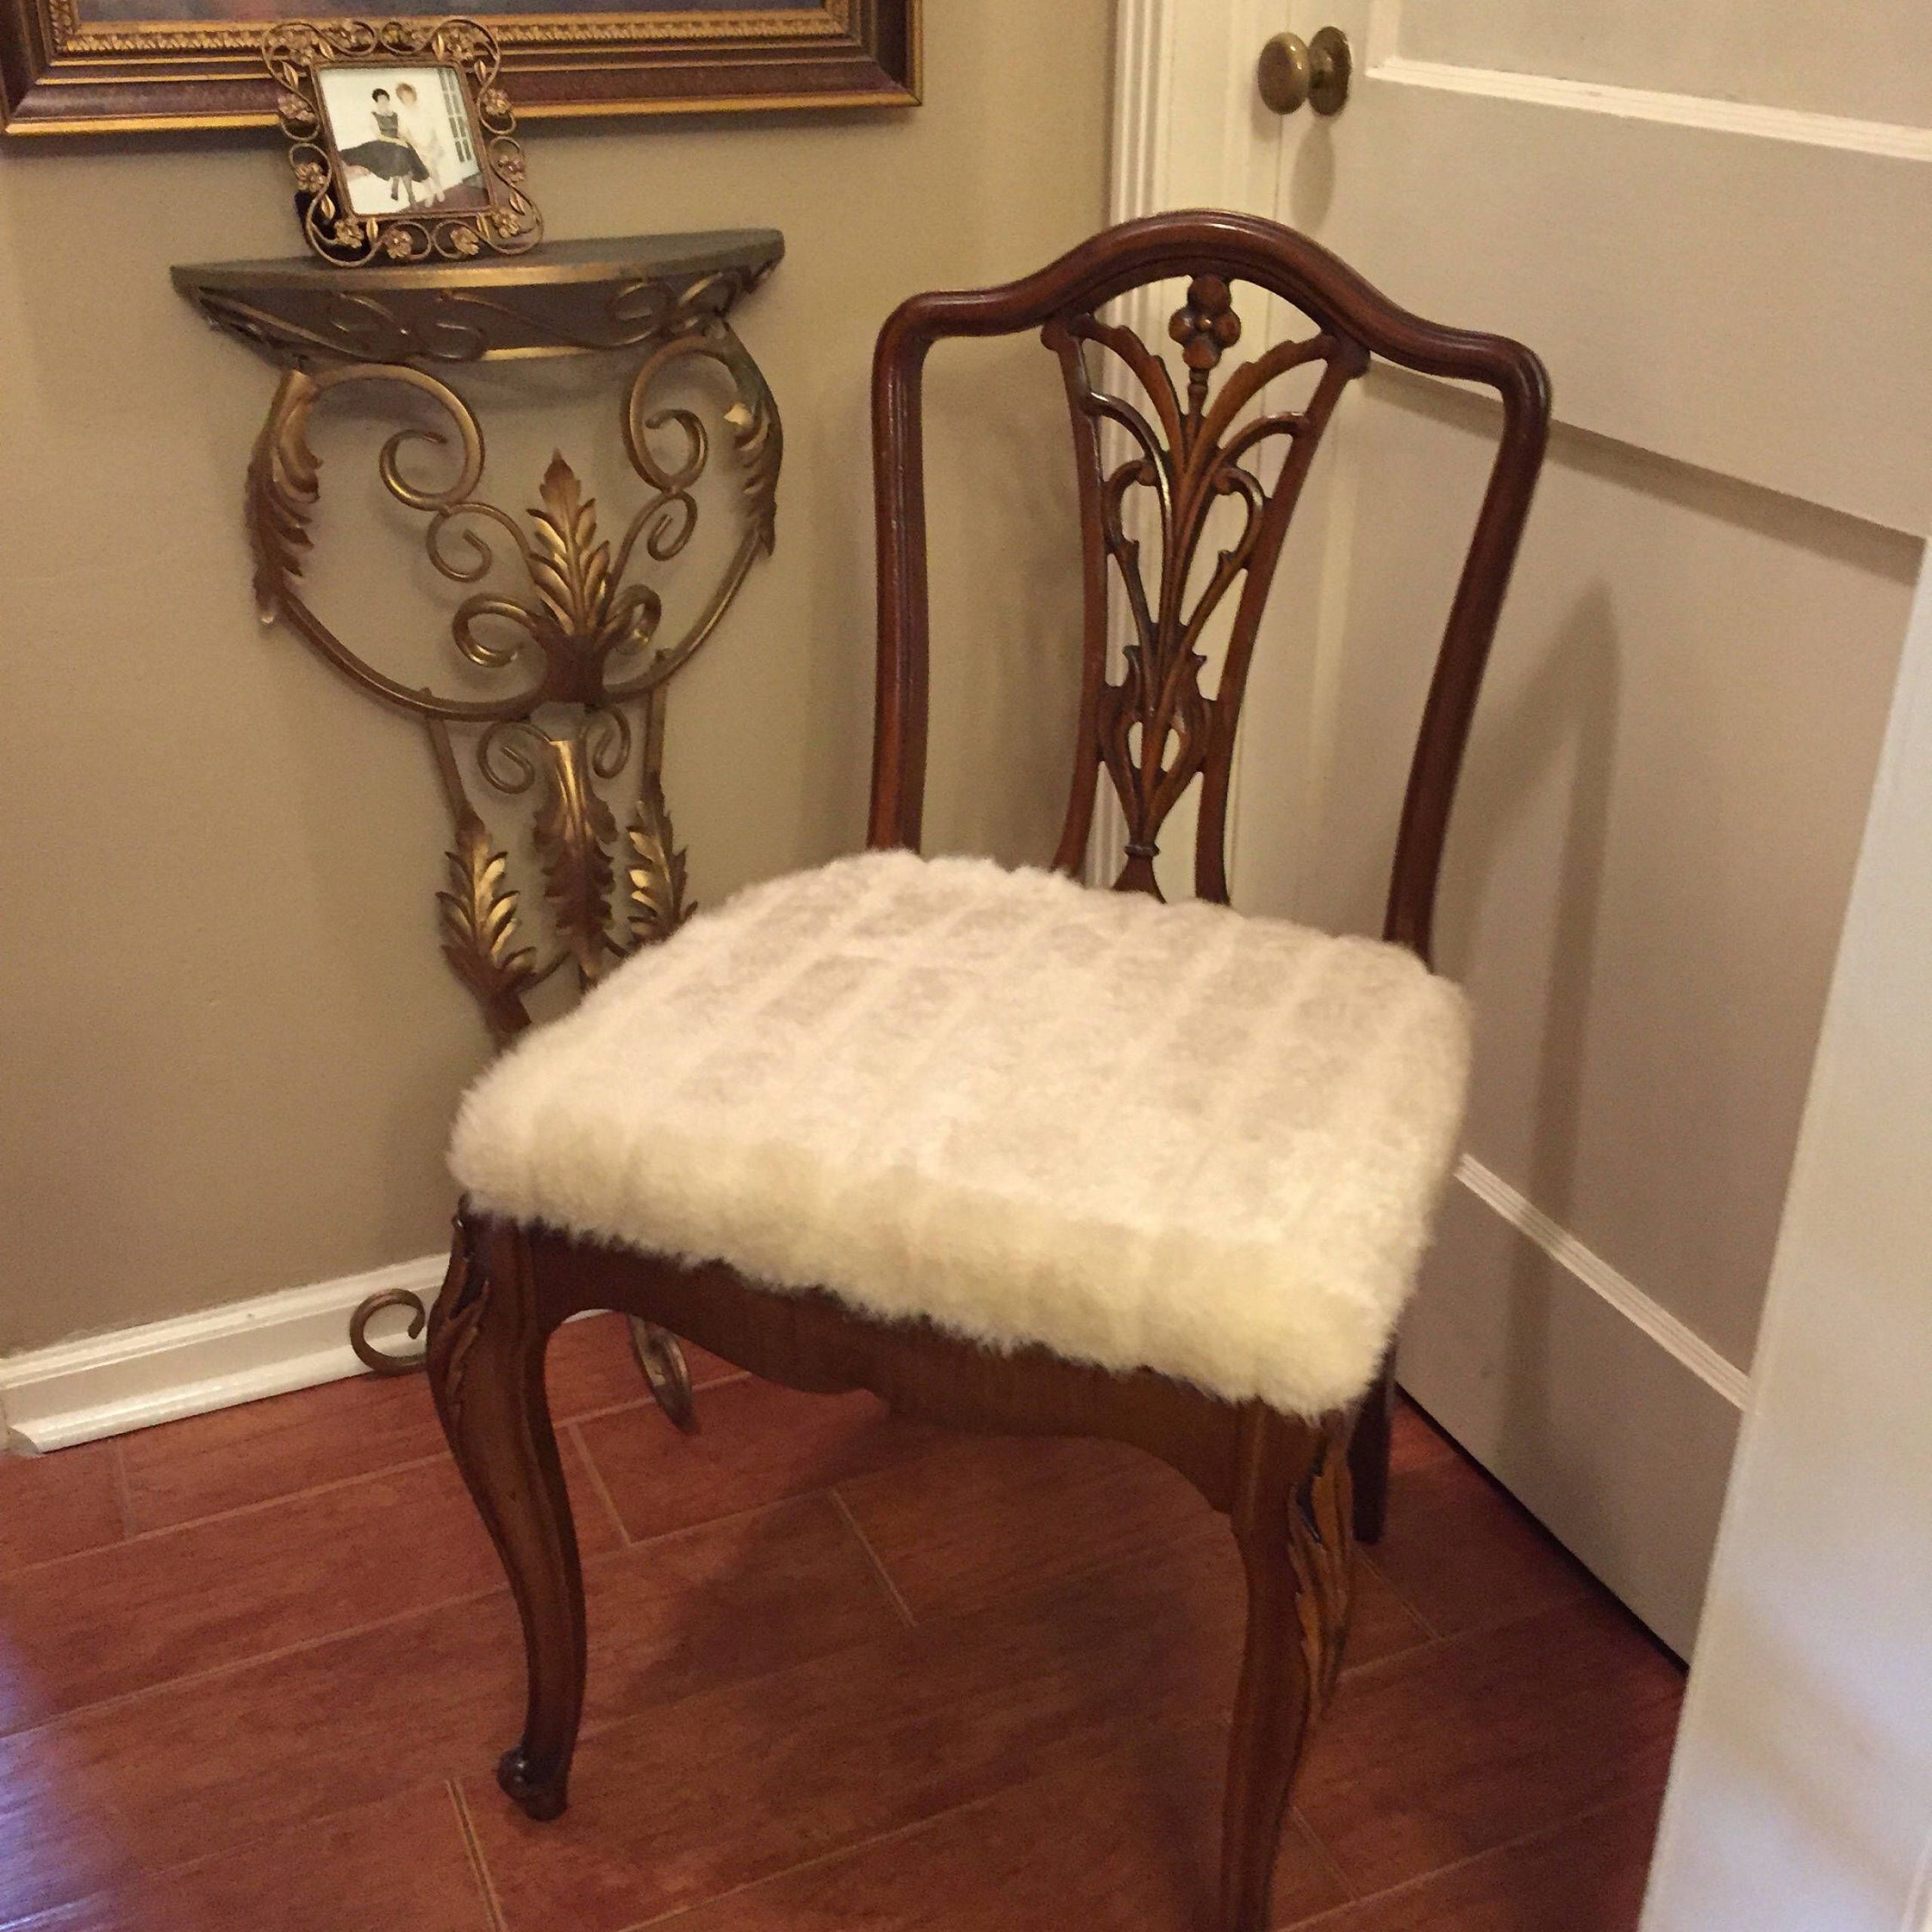 Antique Mahogany French Hand Carved Chair With Faur Fur Seat | Etsy Intended For Cream And Gold Hardwood Vanity Seats (View 1 of 20)